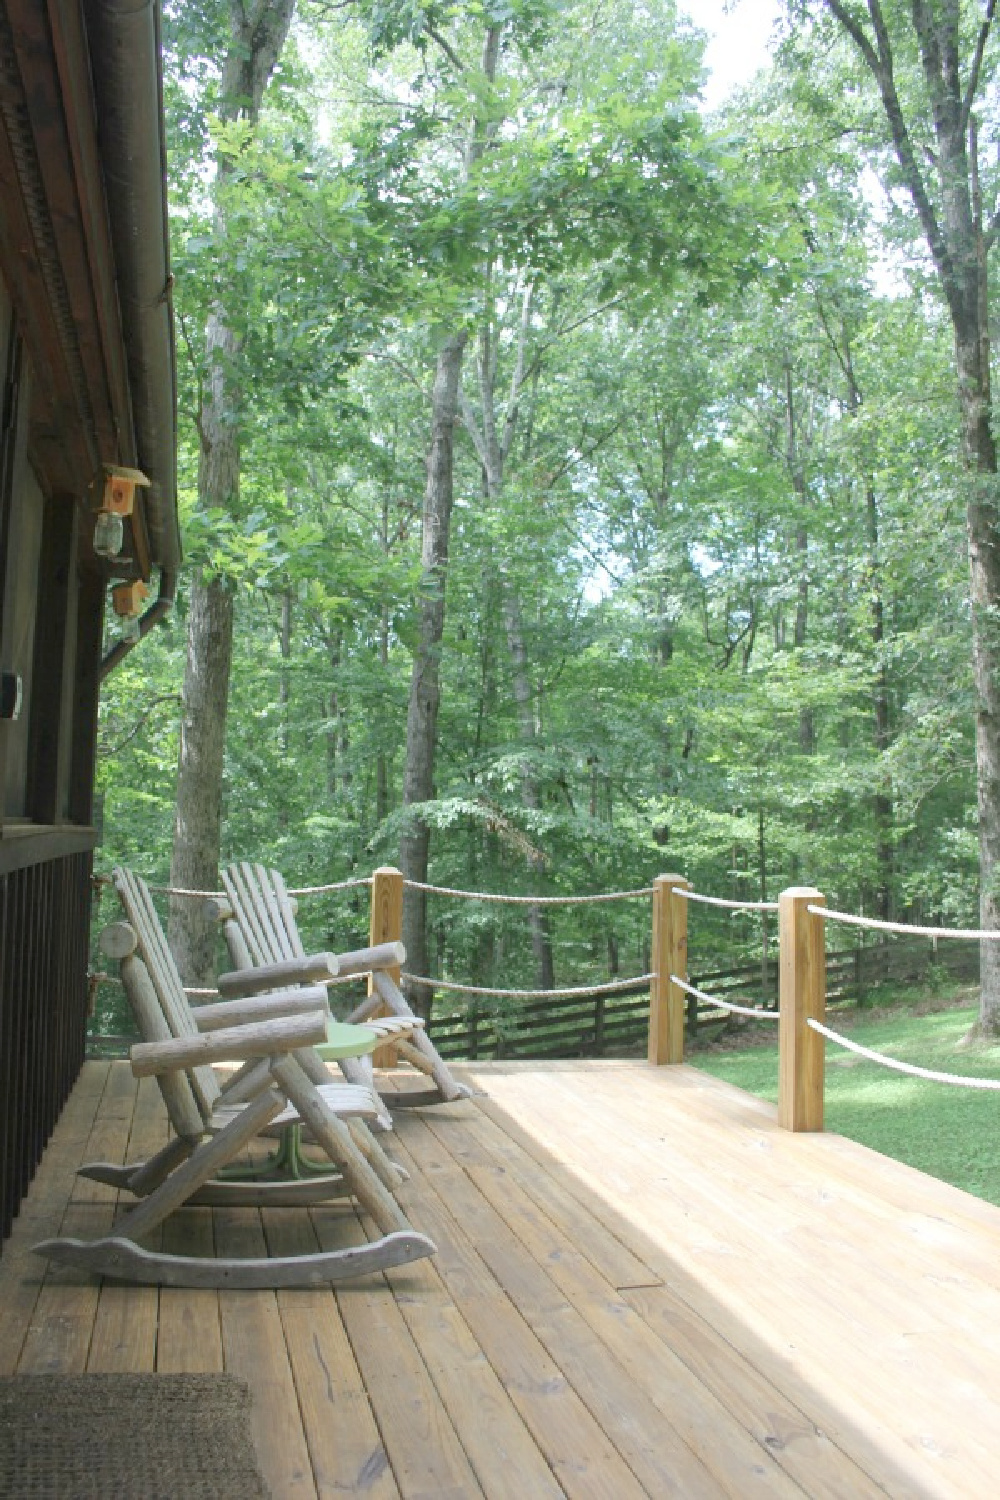 Back porch at rustic country cottage in Leiper's Fork, TN known as storybook cottage - Hello Lovely Studio.